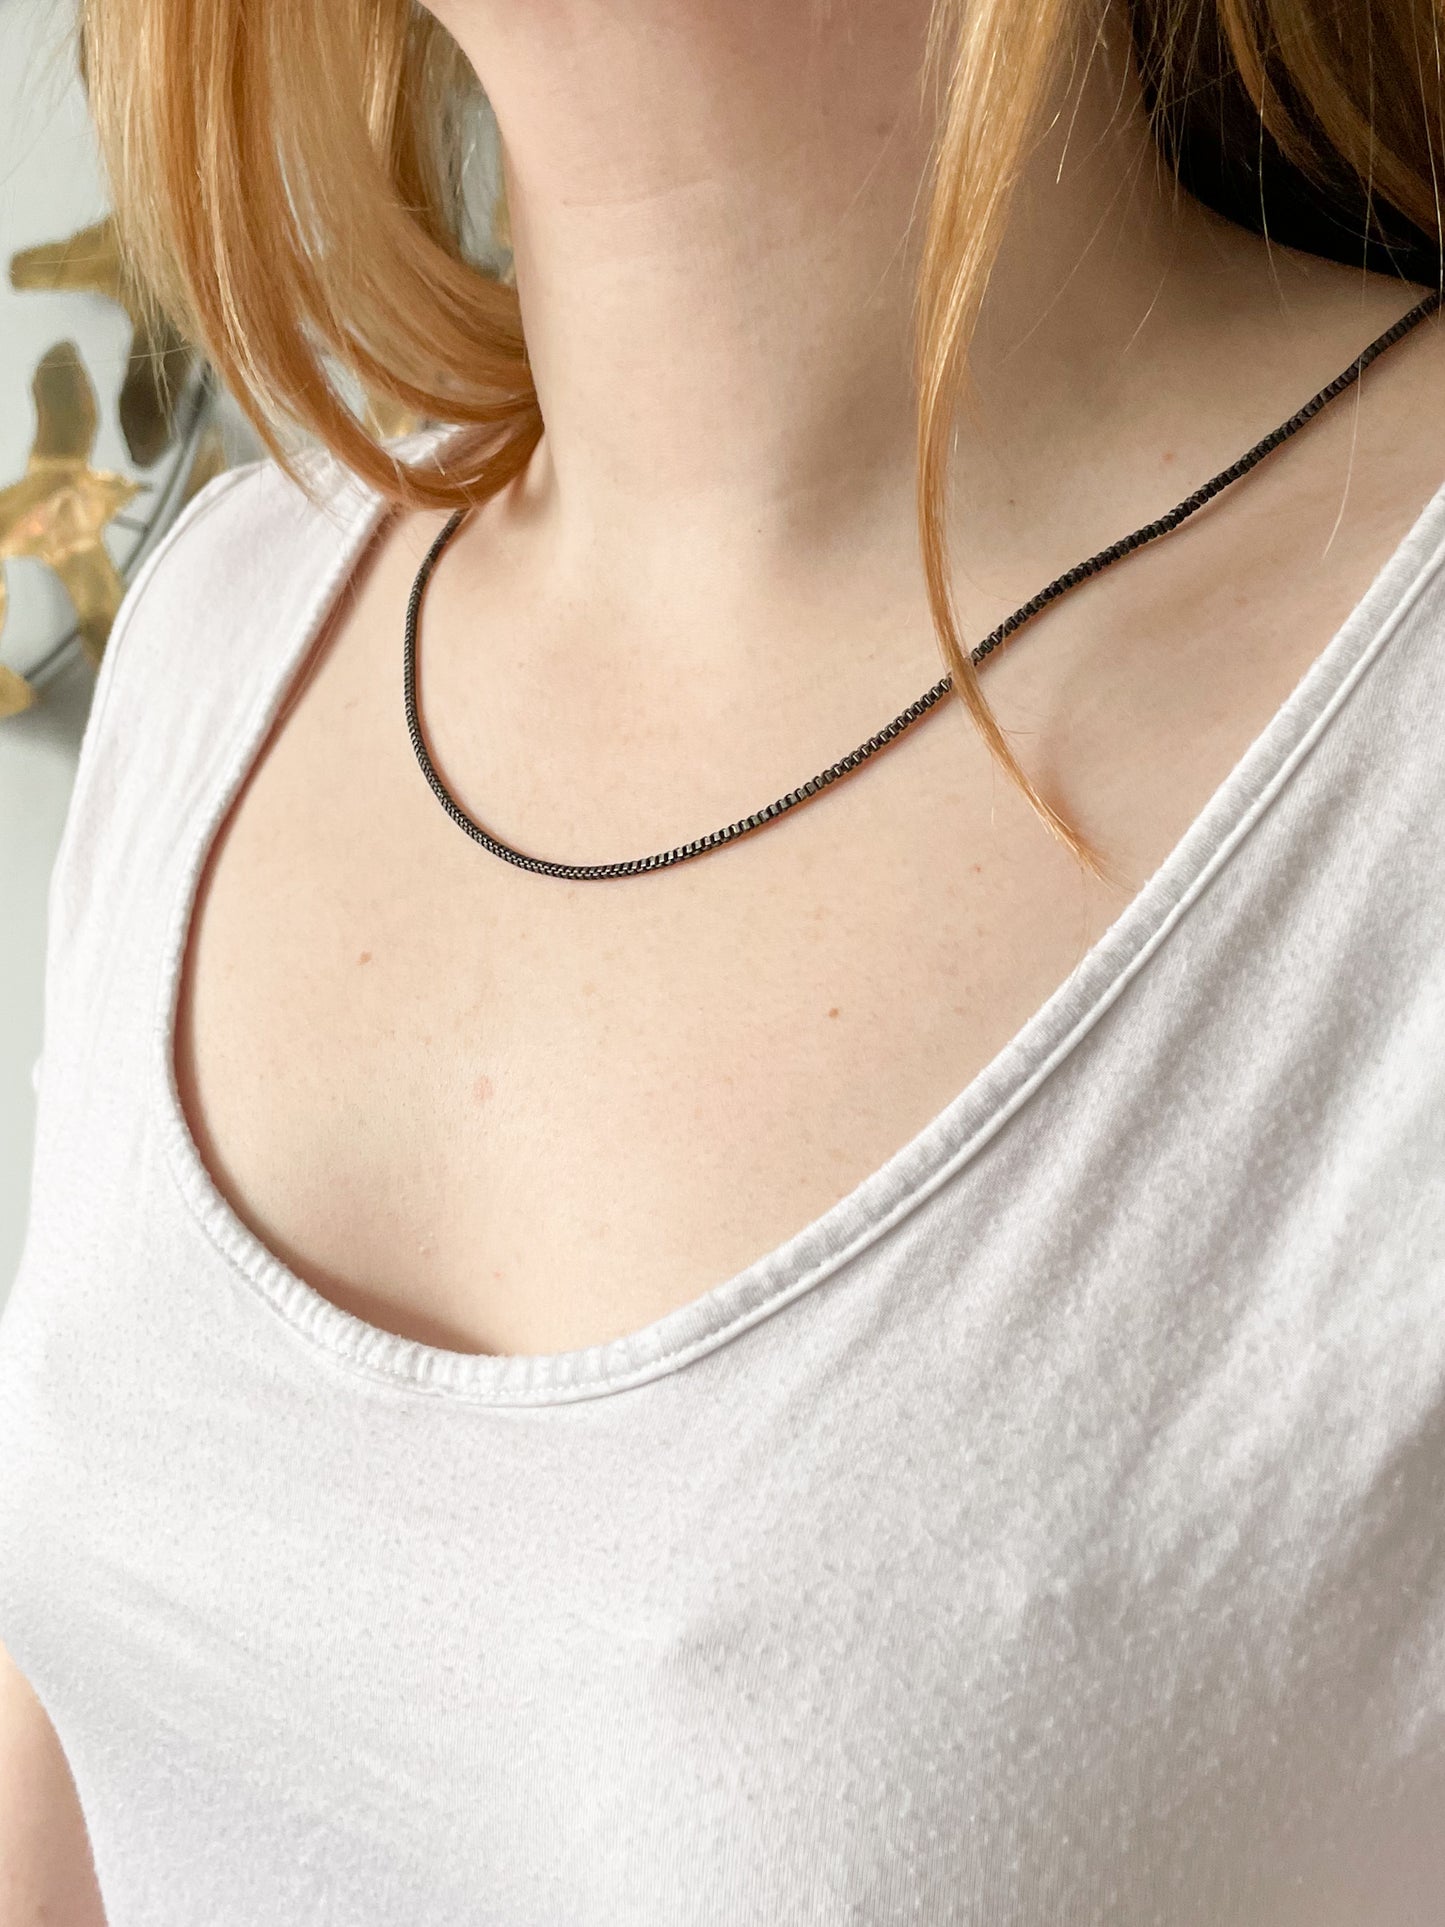 Pewter Delicate Box Chain Necklace - 22" long